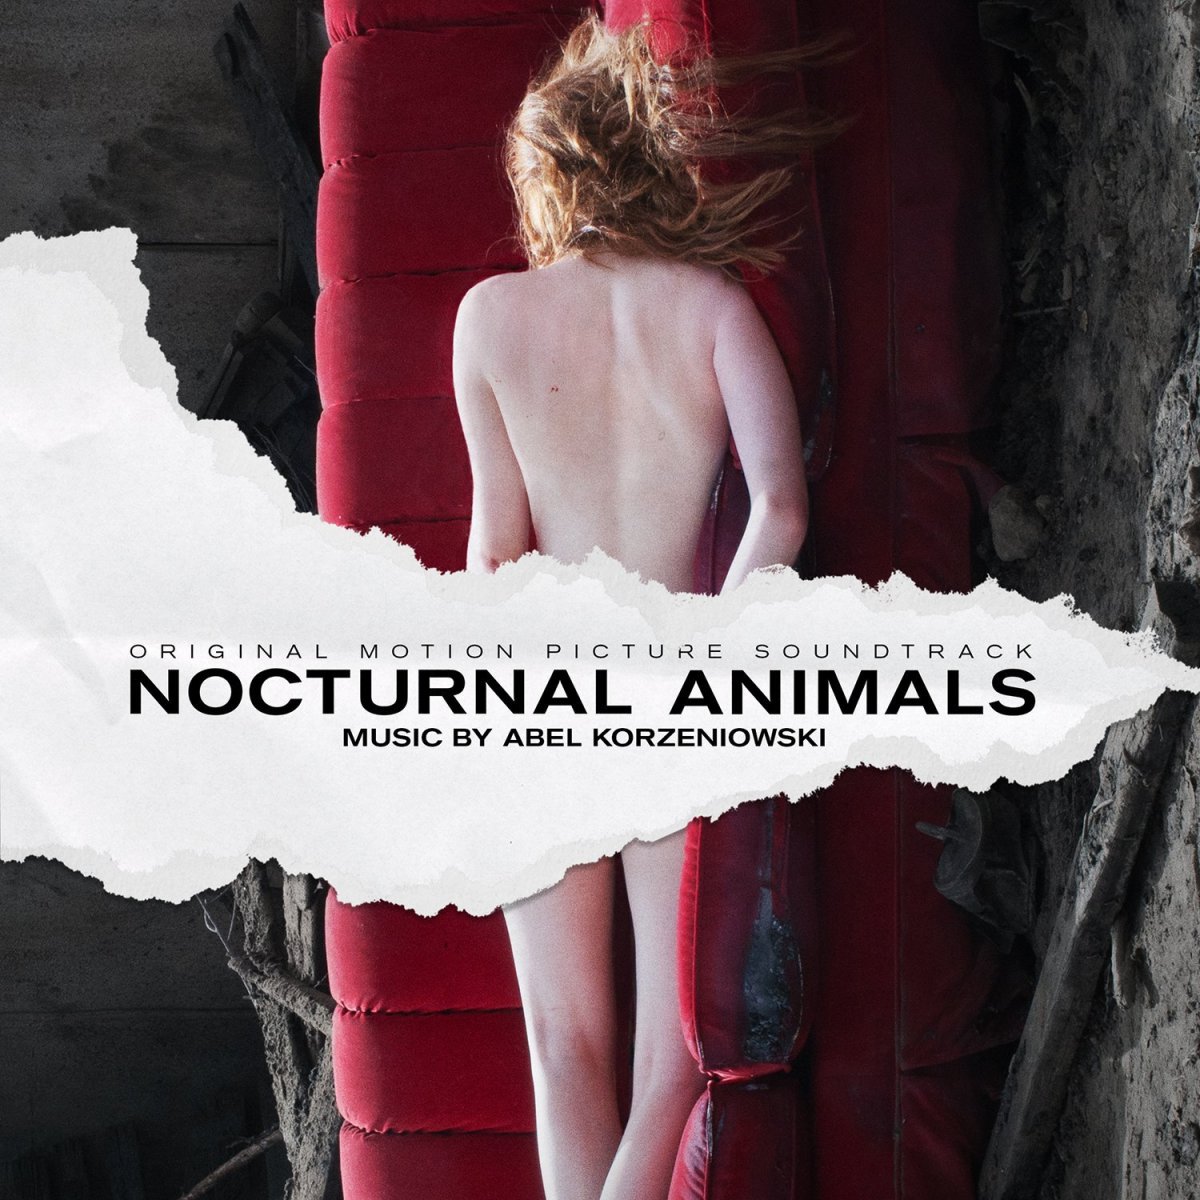 Nocturnal Animals review: Novel,stylish and gnarly. A new perspective on  neo-noir. – Film and Nuance